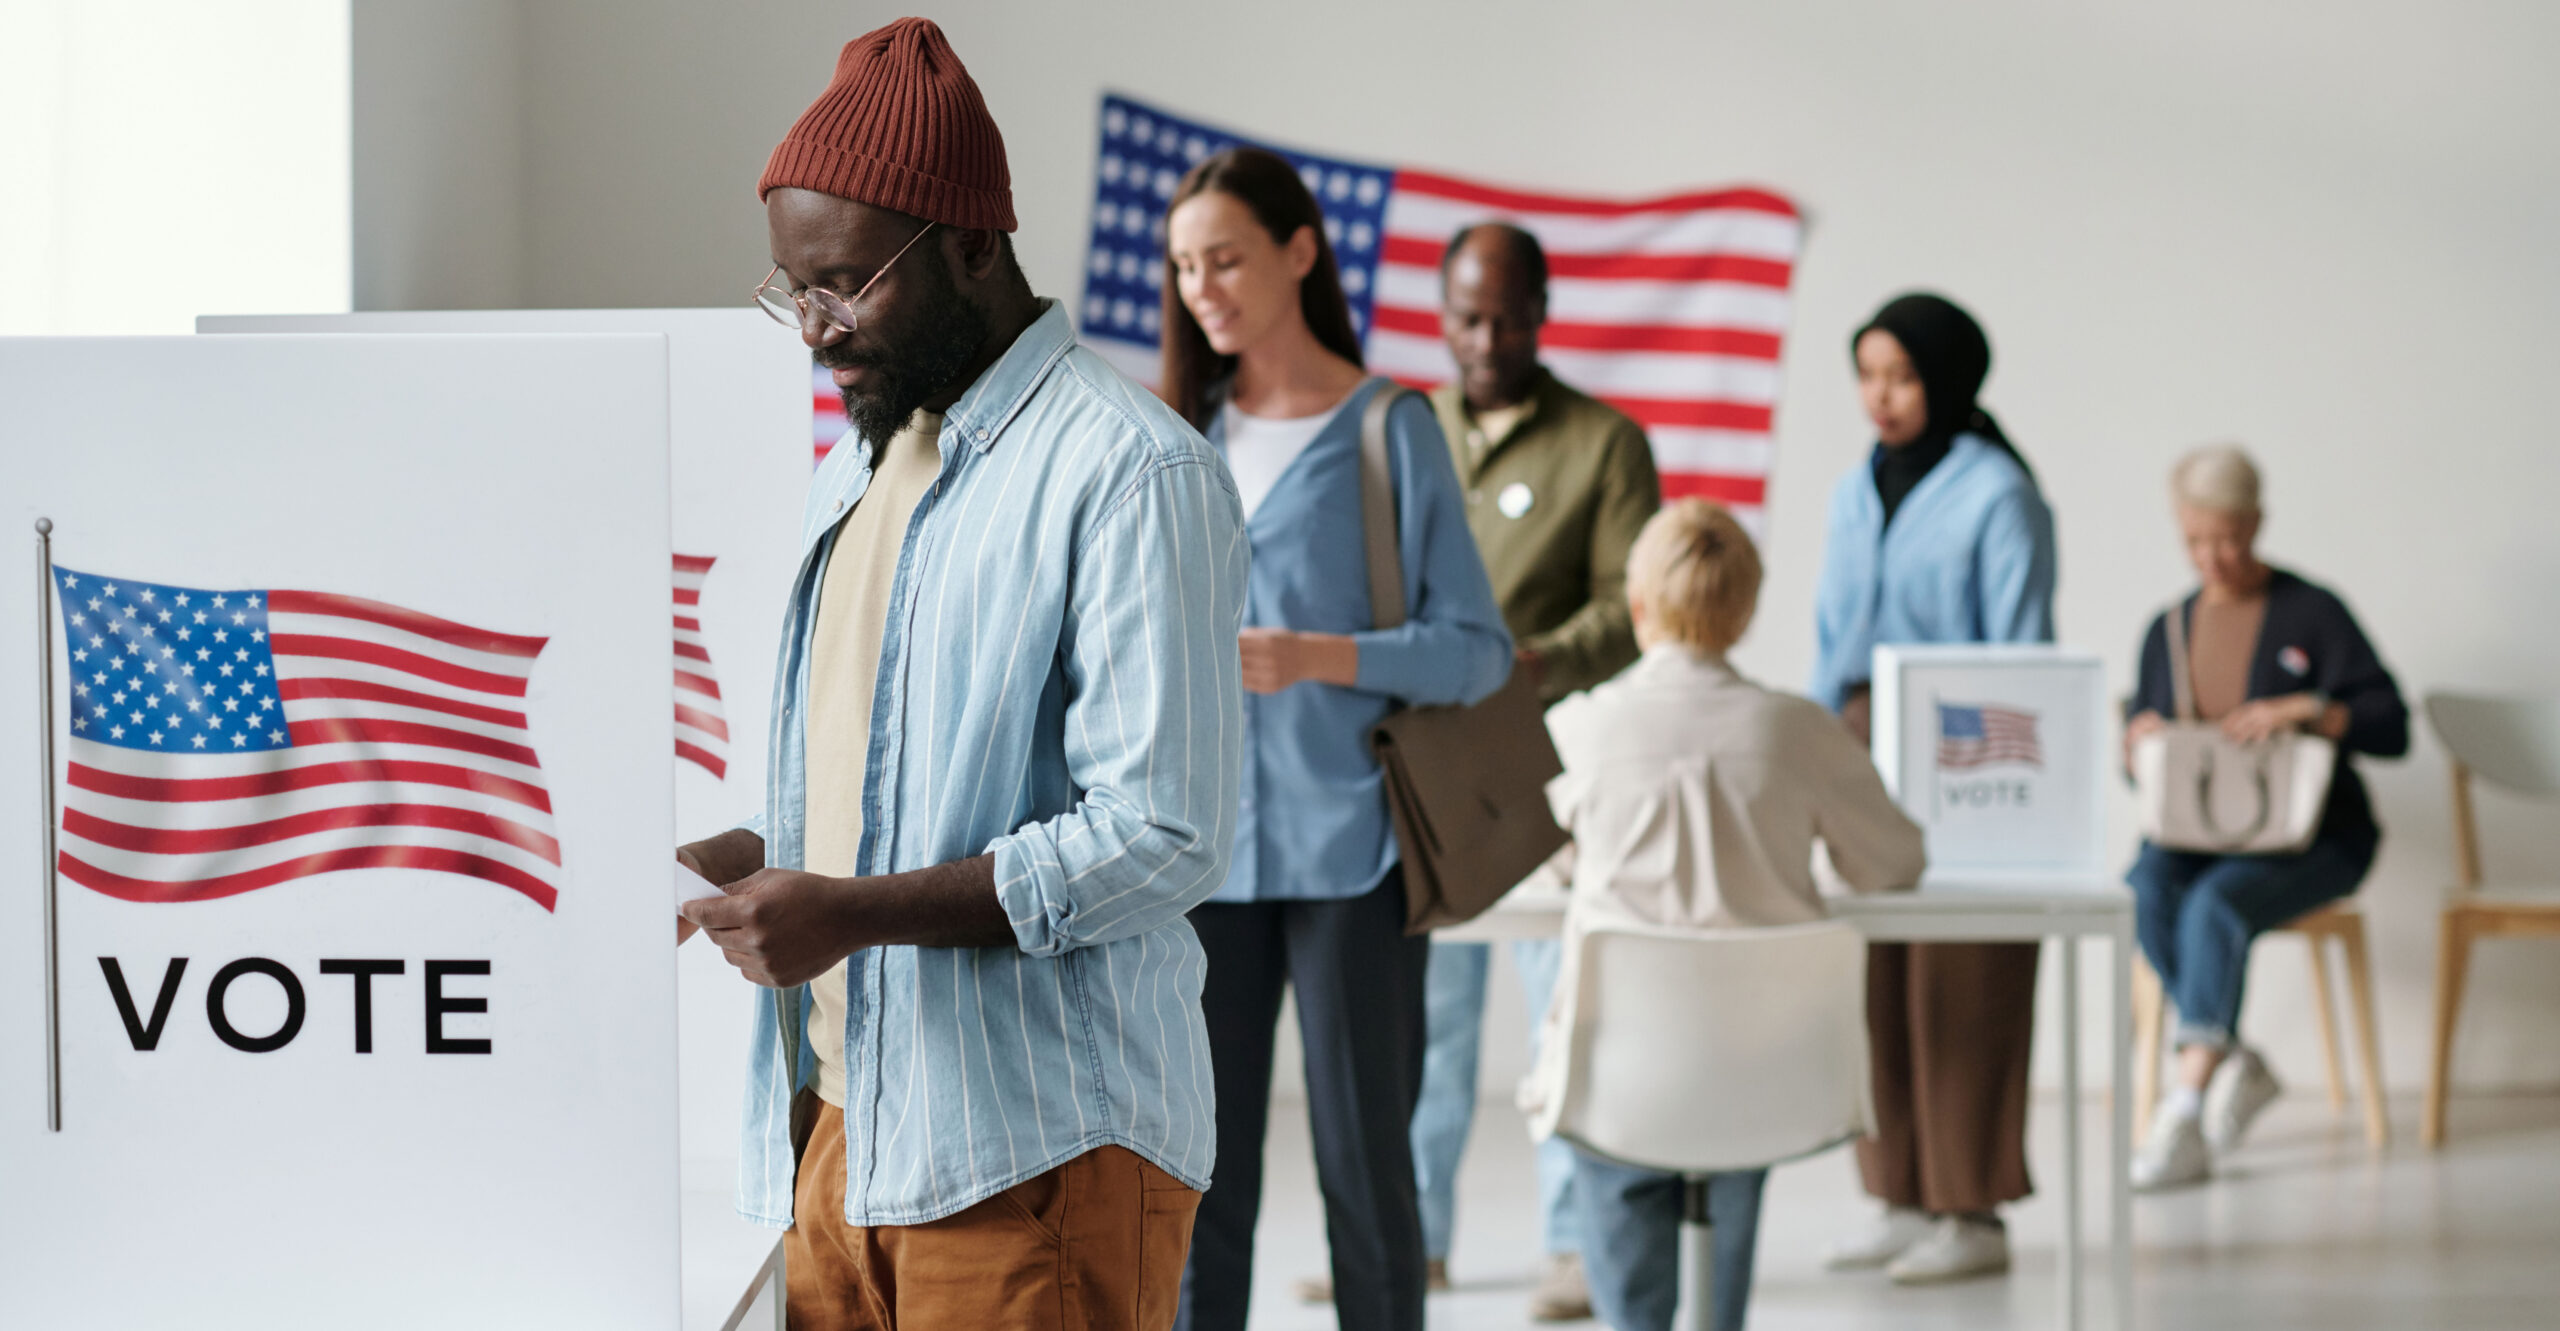 The Right to Vote Is a Privilege Reserved for Citizens, Not for Illegal Immigrants